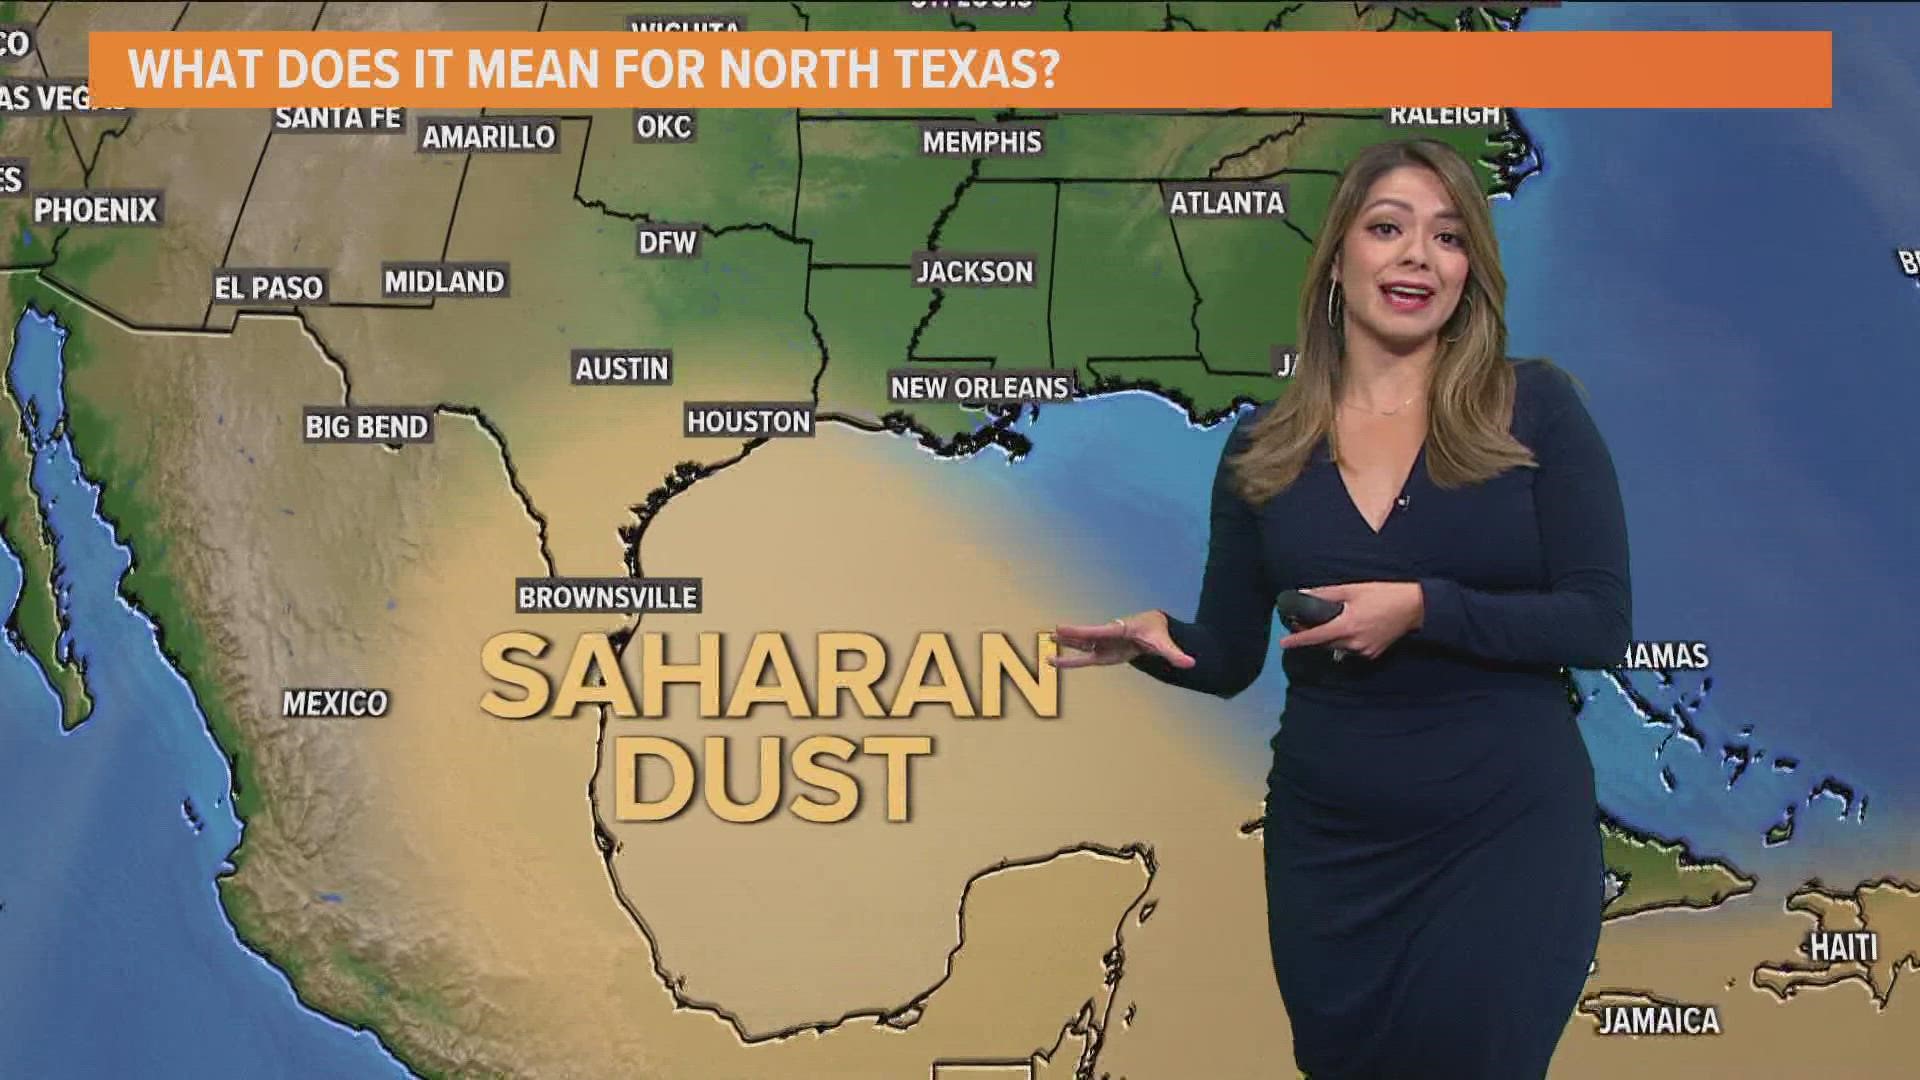 Saharan Dust travels across the Atlantic during late spring, summer and early autumn.